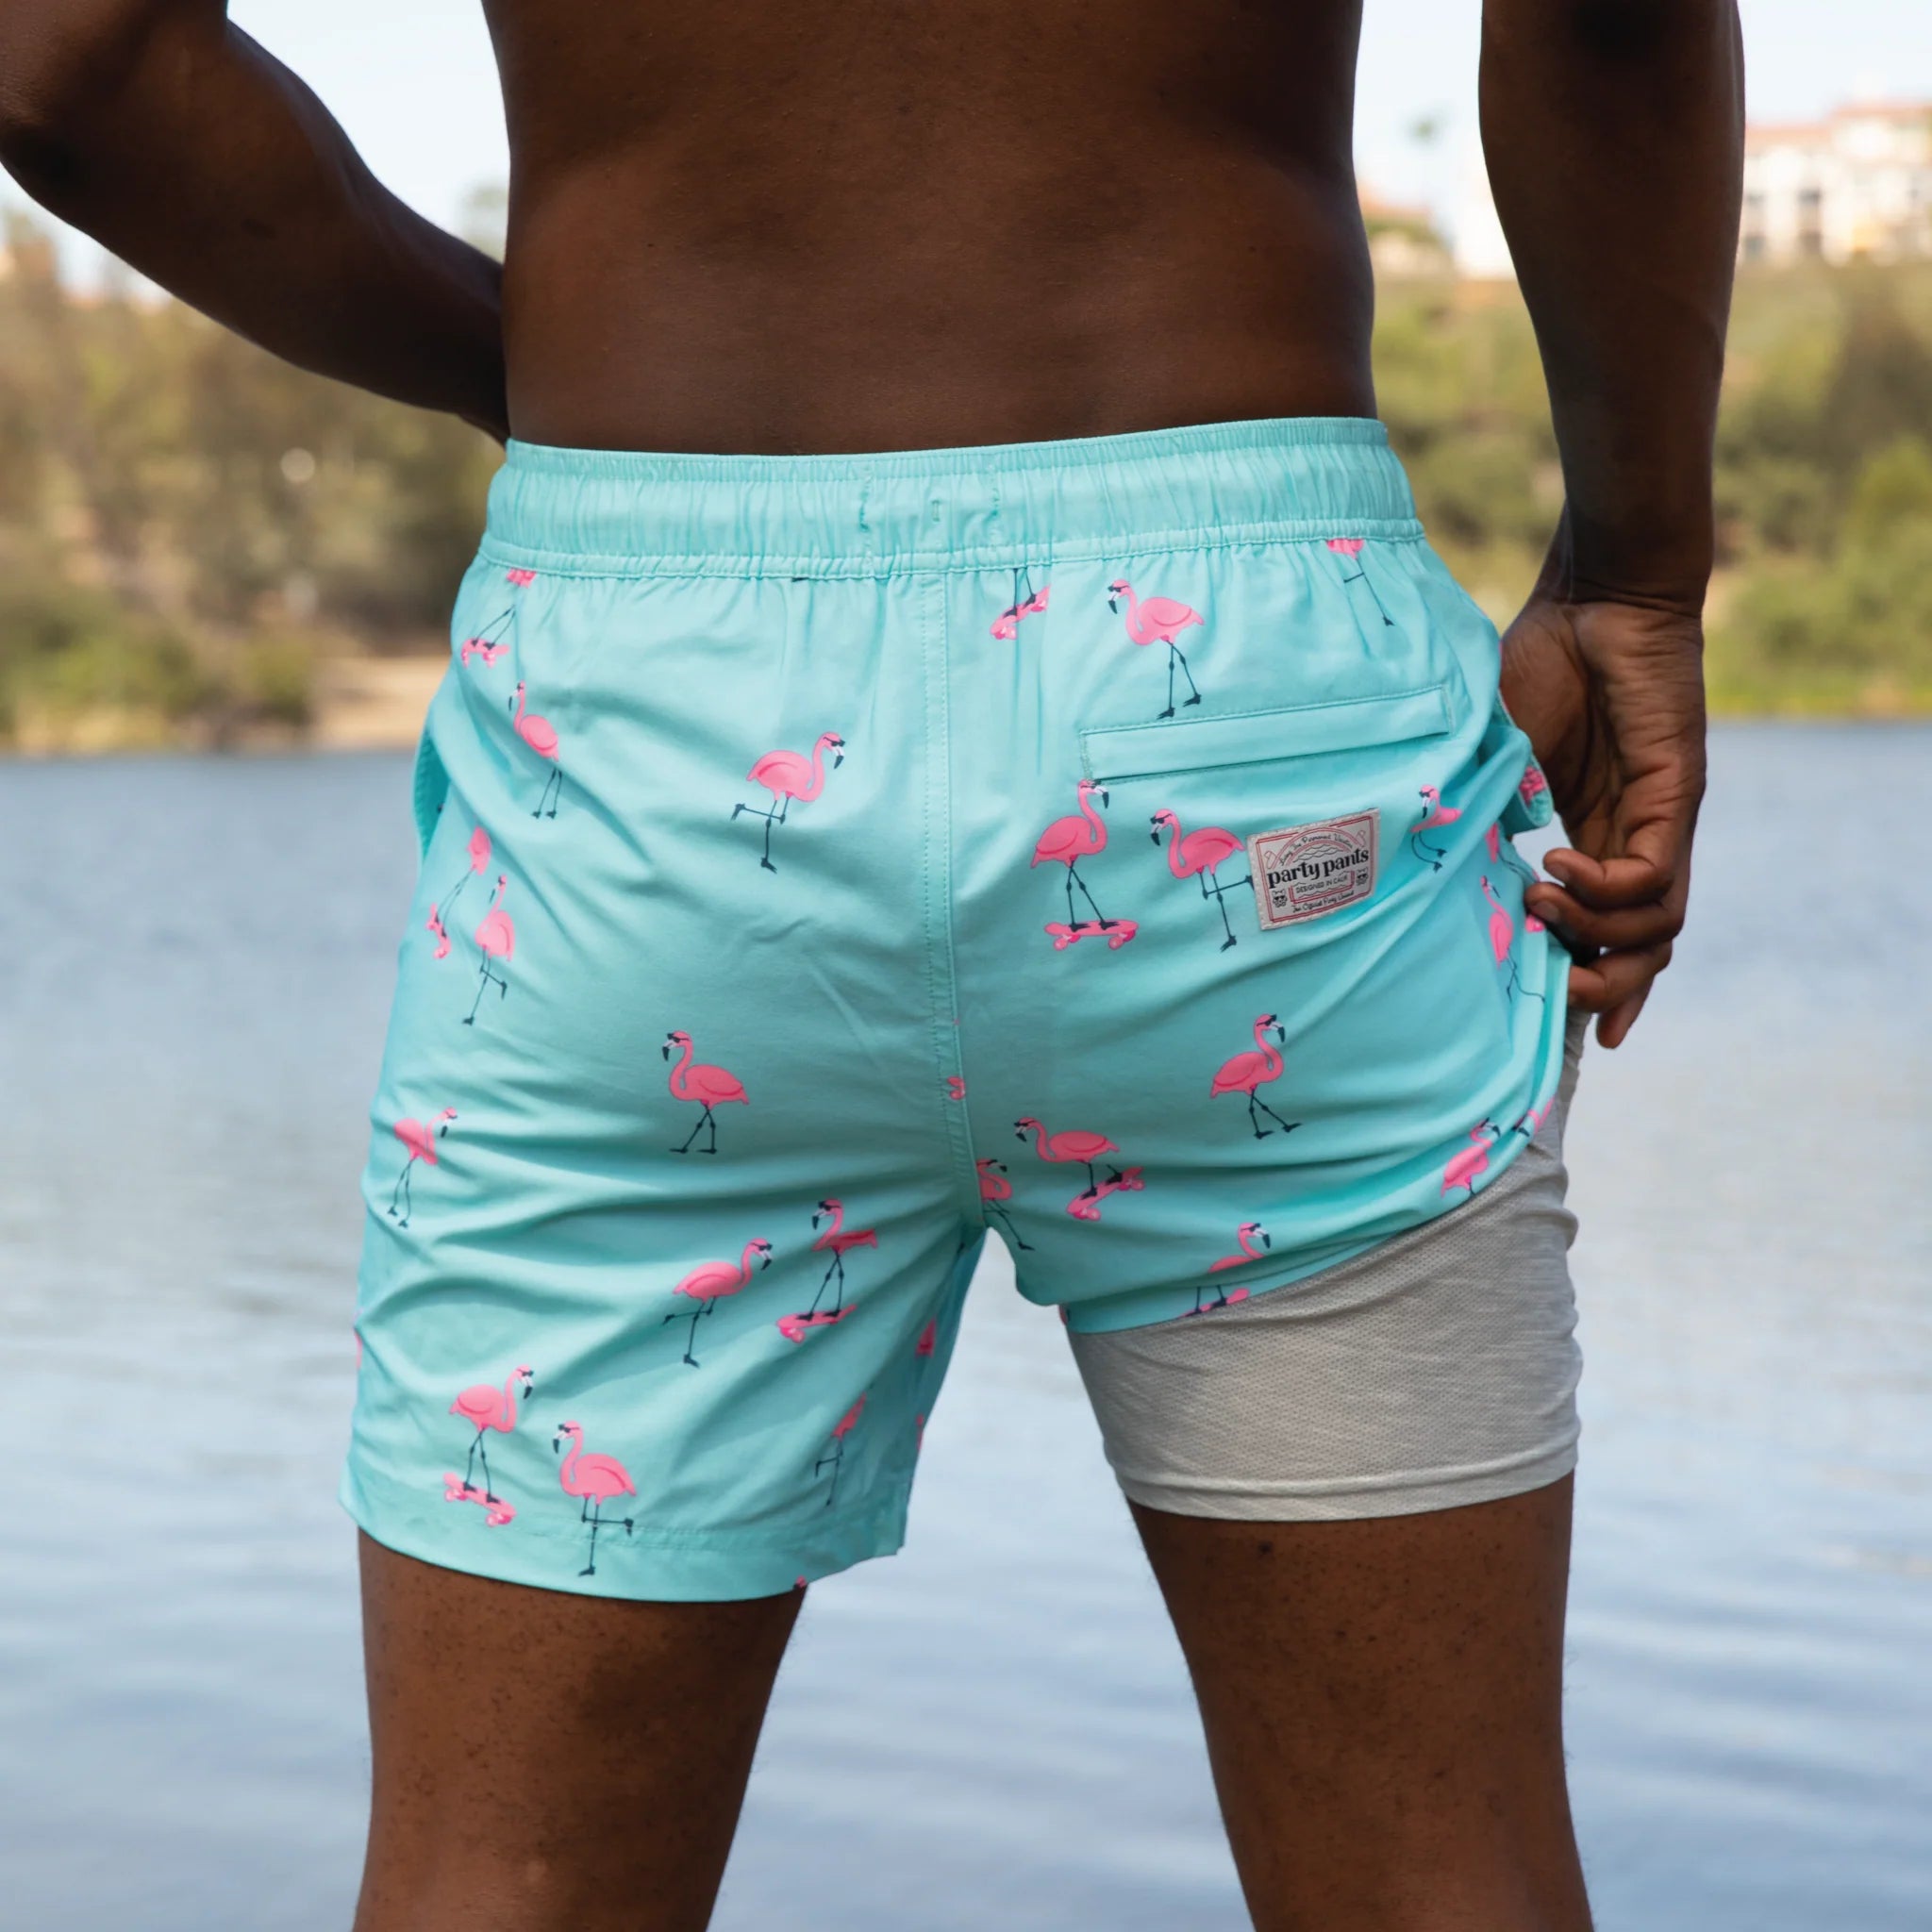 A guy wearing the Cruisers Sport Lined Short - Light Blue